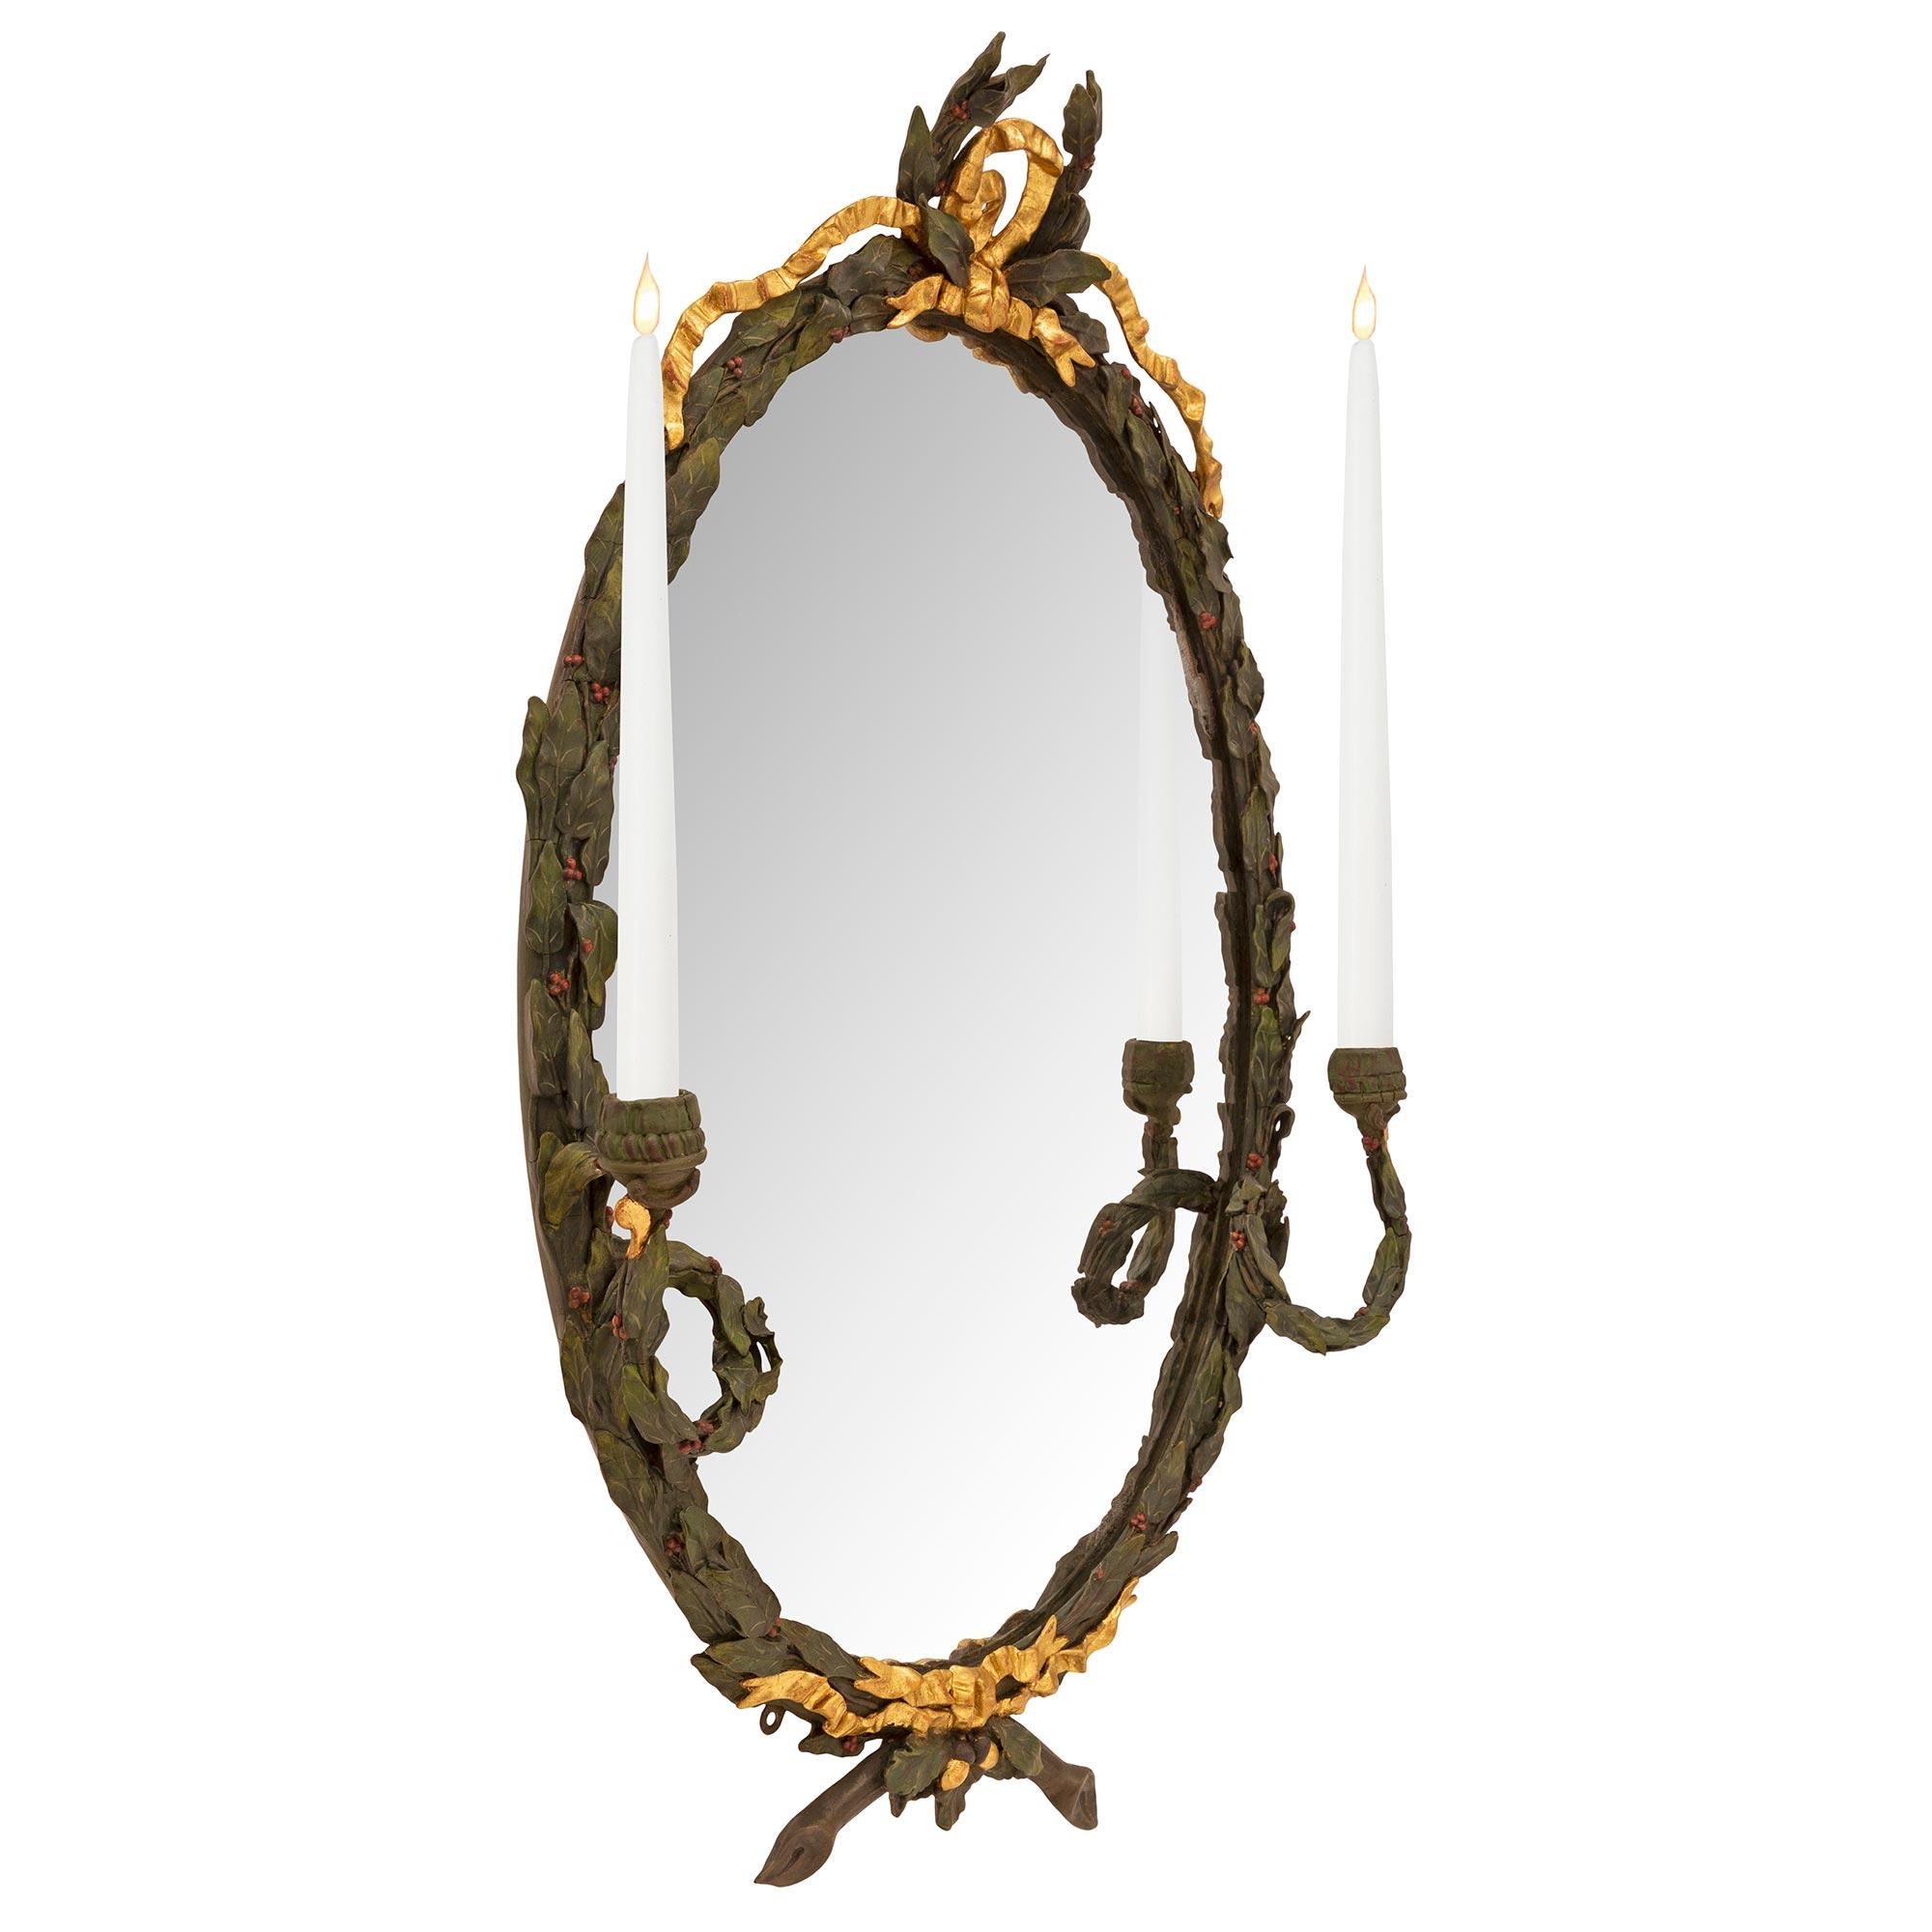 A beautiful and most decorative pair of French 19th century Louis XVI st. patinated wood and giltwood mirrors/sconces. Each mirror retains its original mirror plate set within a beautiful richly carved patinated forest green berried laurel frame